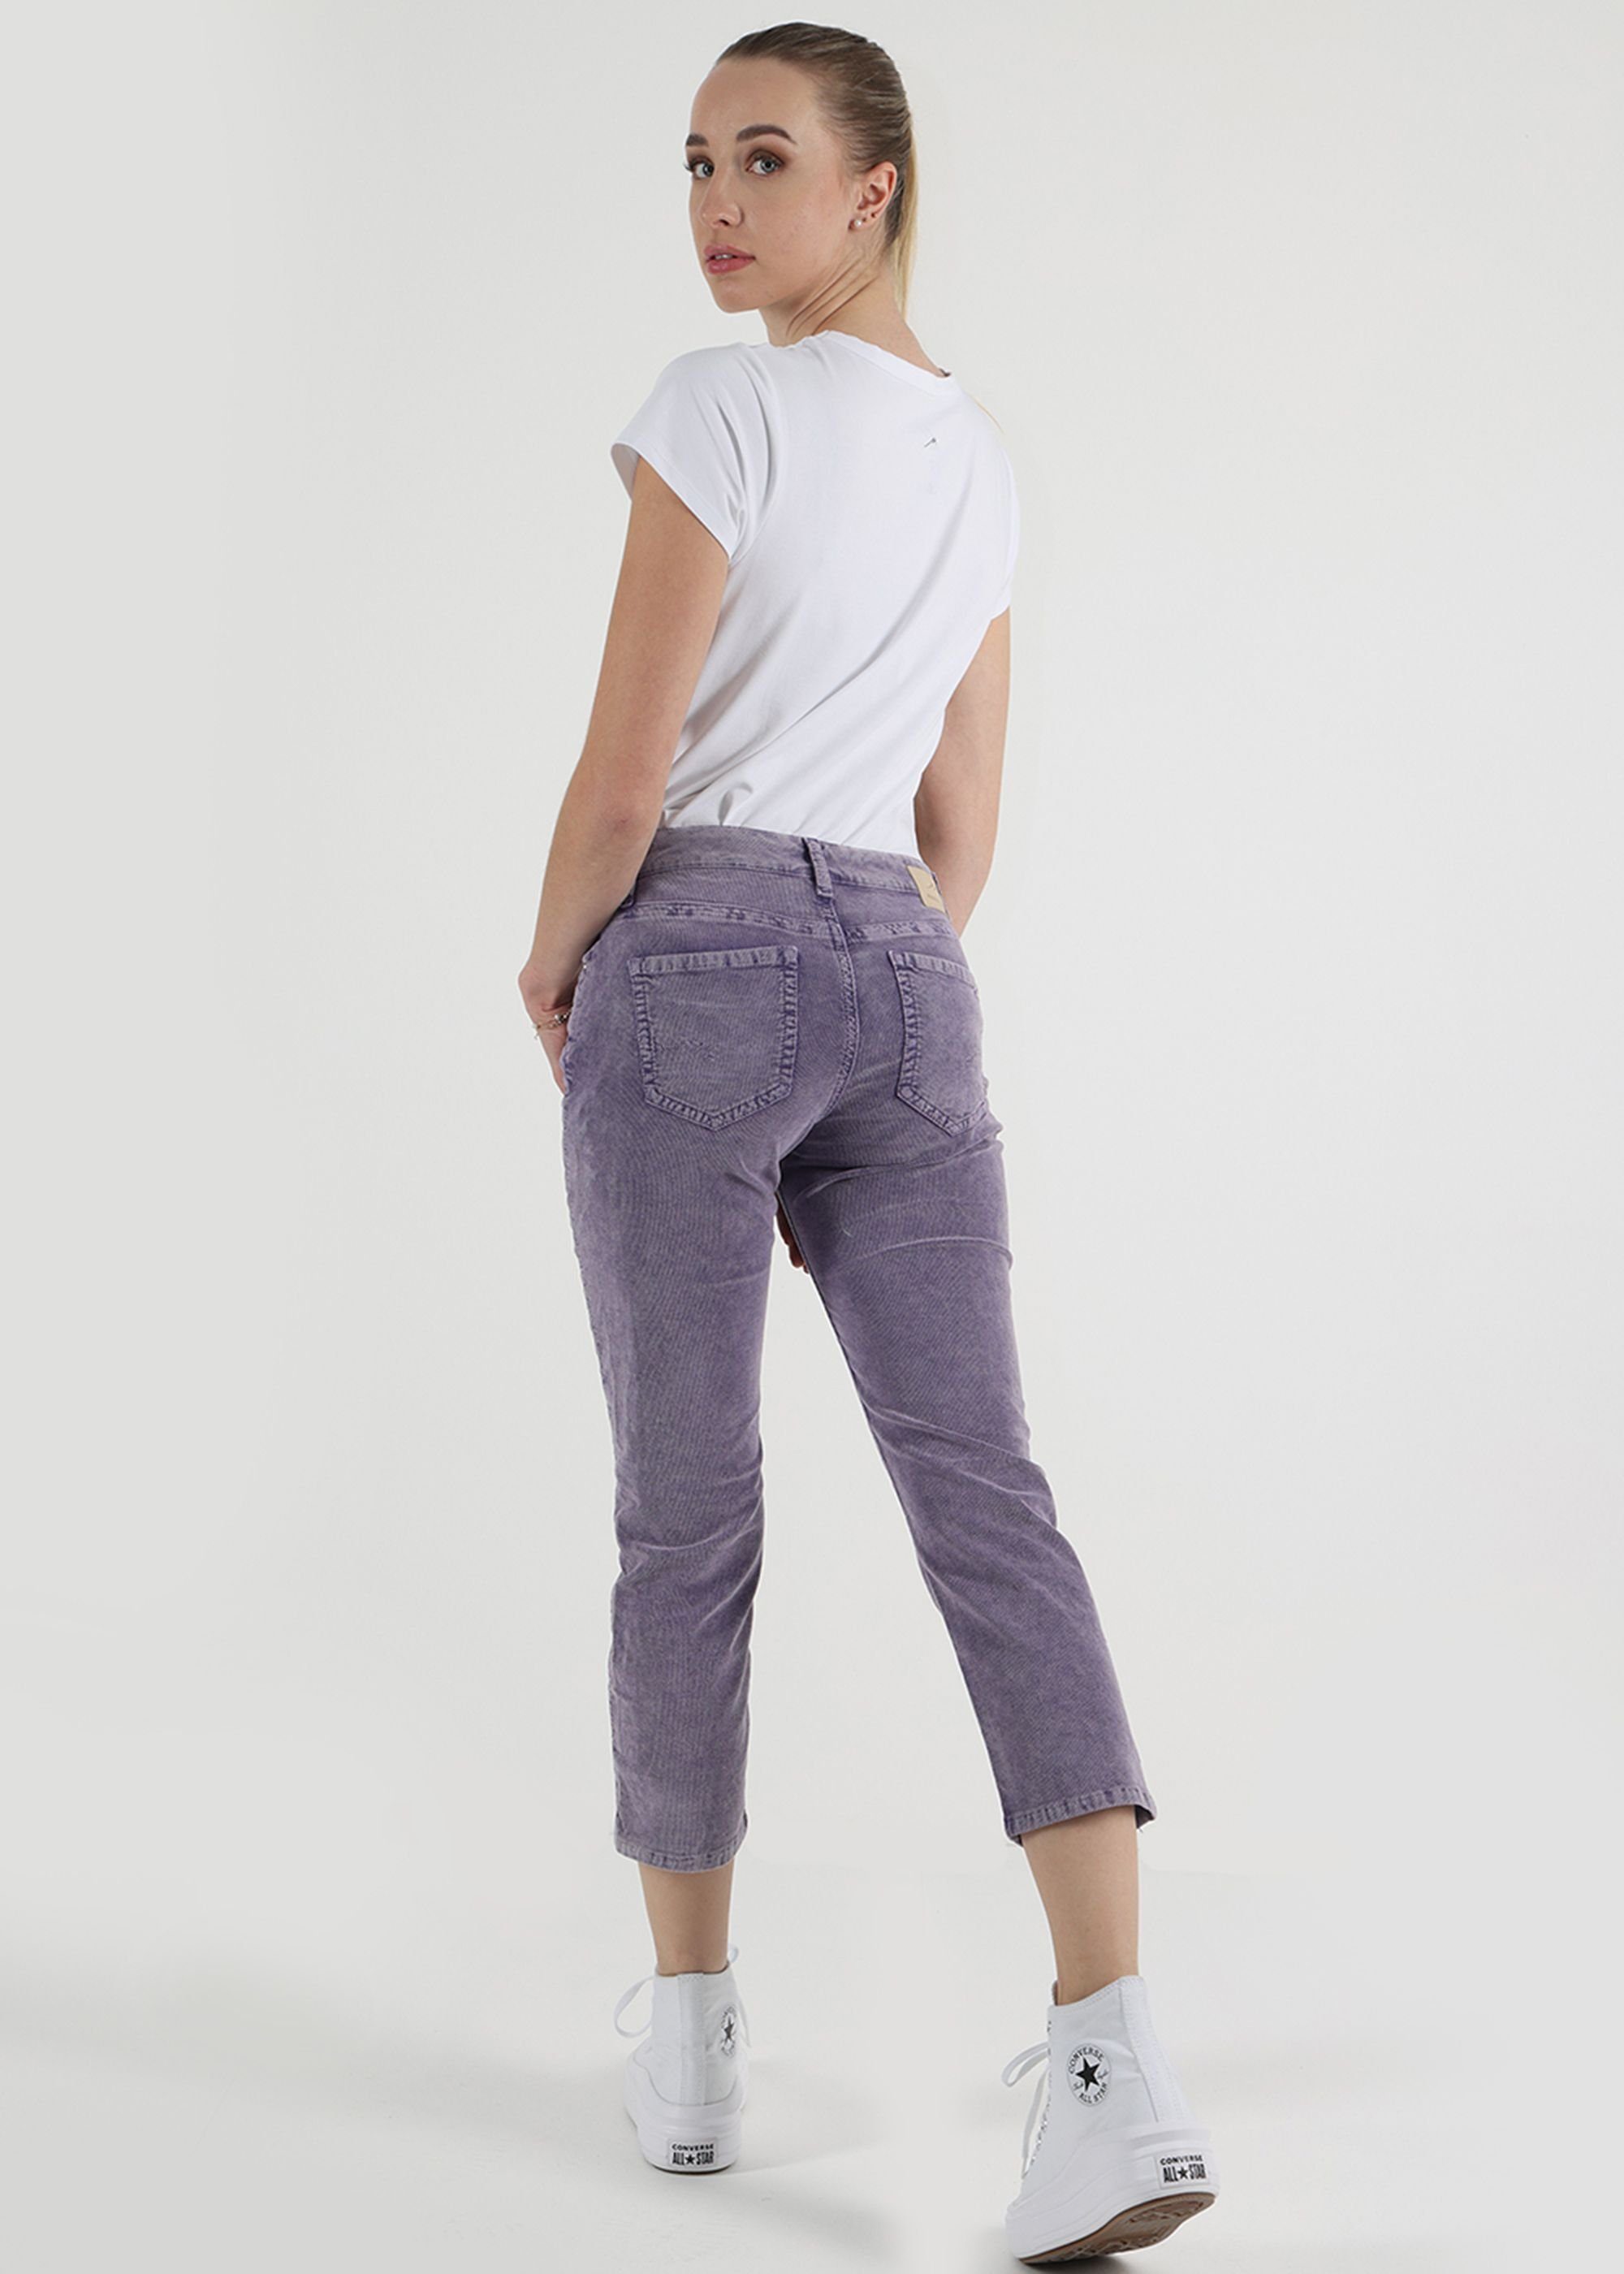 Miracle of Daisy L.Lilac Denim im 5-Pocket-Jeans Used Look